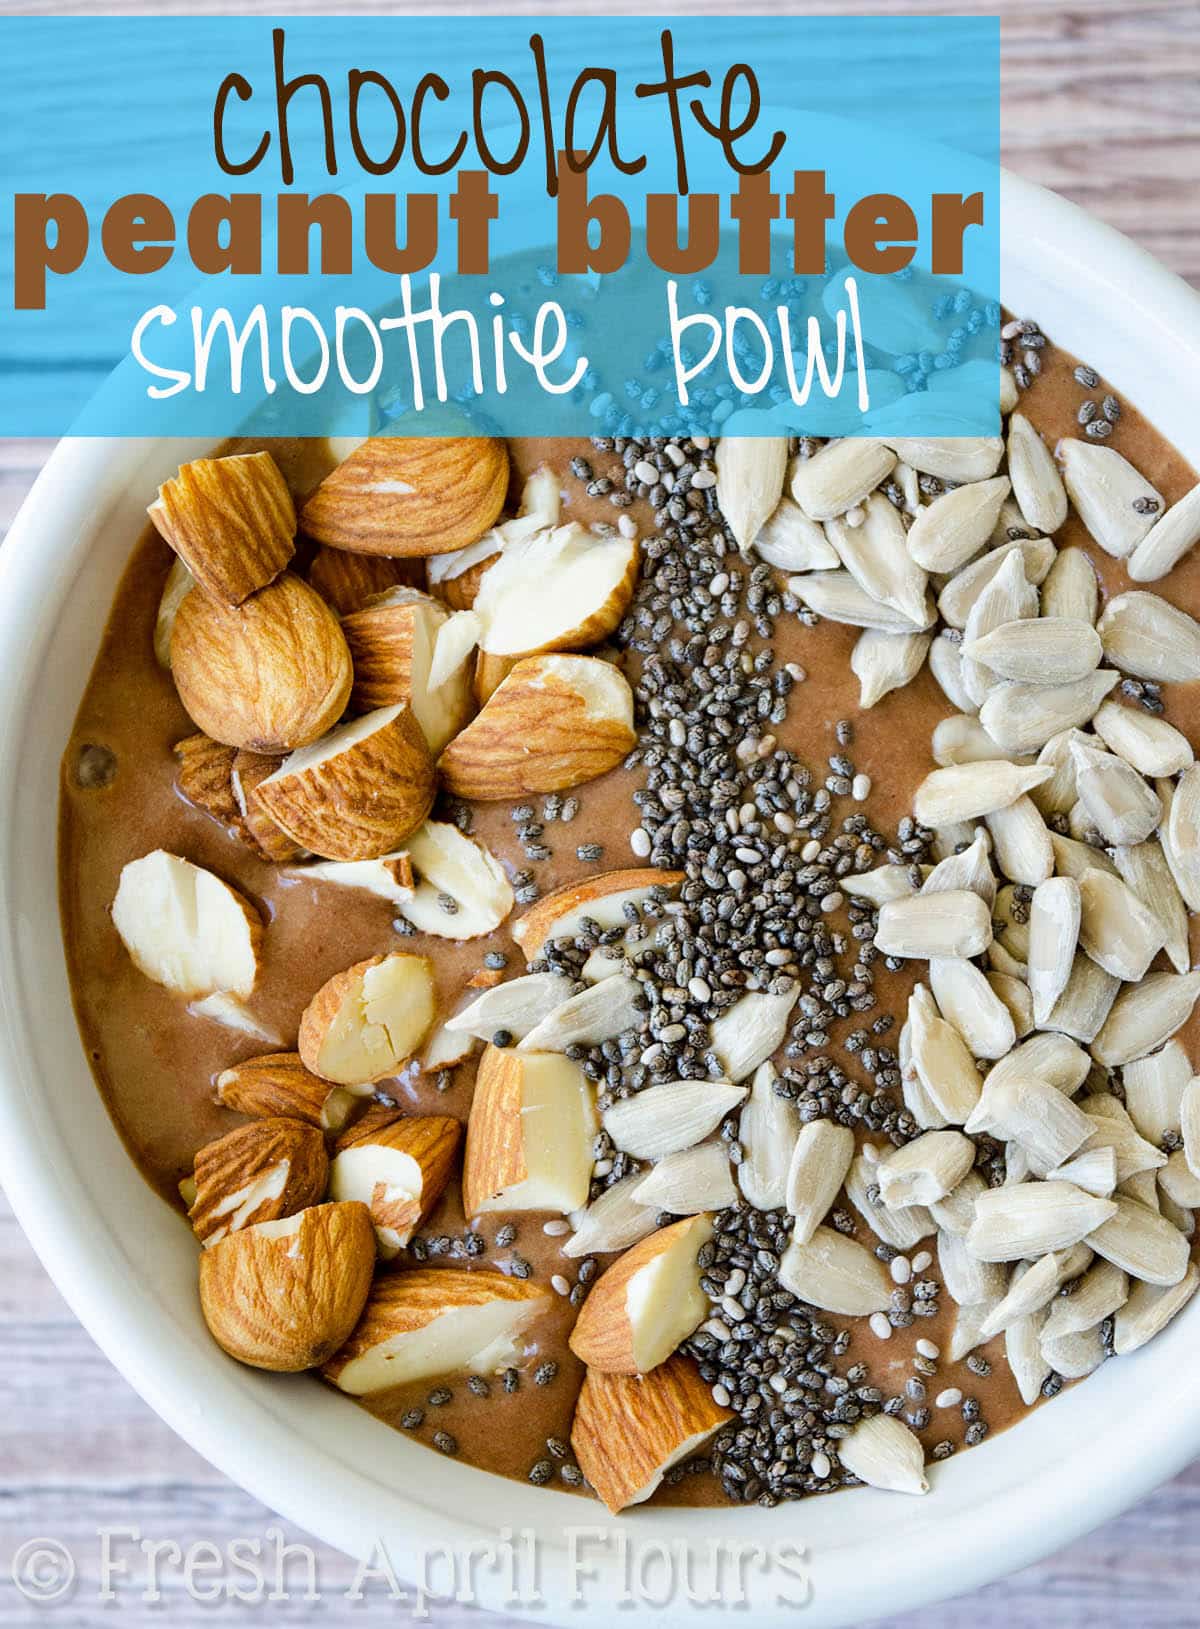 Chocolate Peanut Butter Smoothie Bowl: Thick and creamy smoothie bowl that makes you feel like you're eating a bowl of chocolate ice cream! Add any of your favorite toppings. via @frshaprilflours